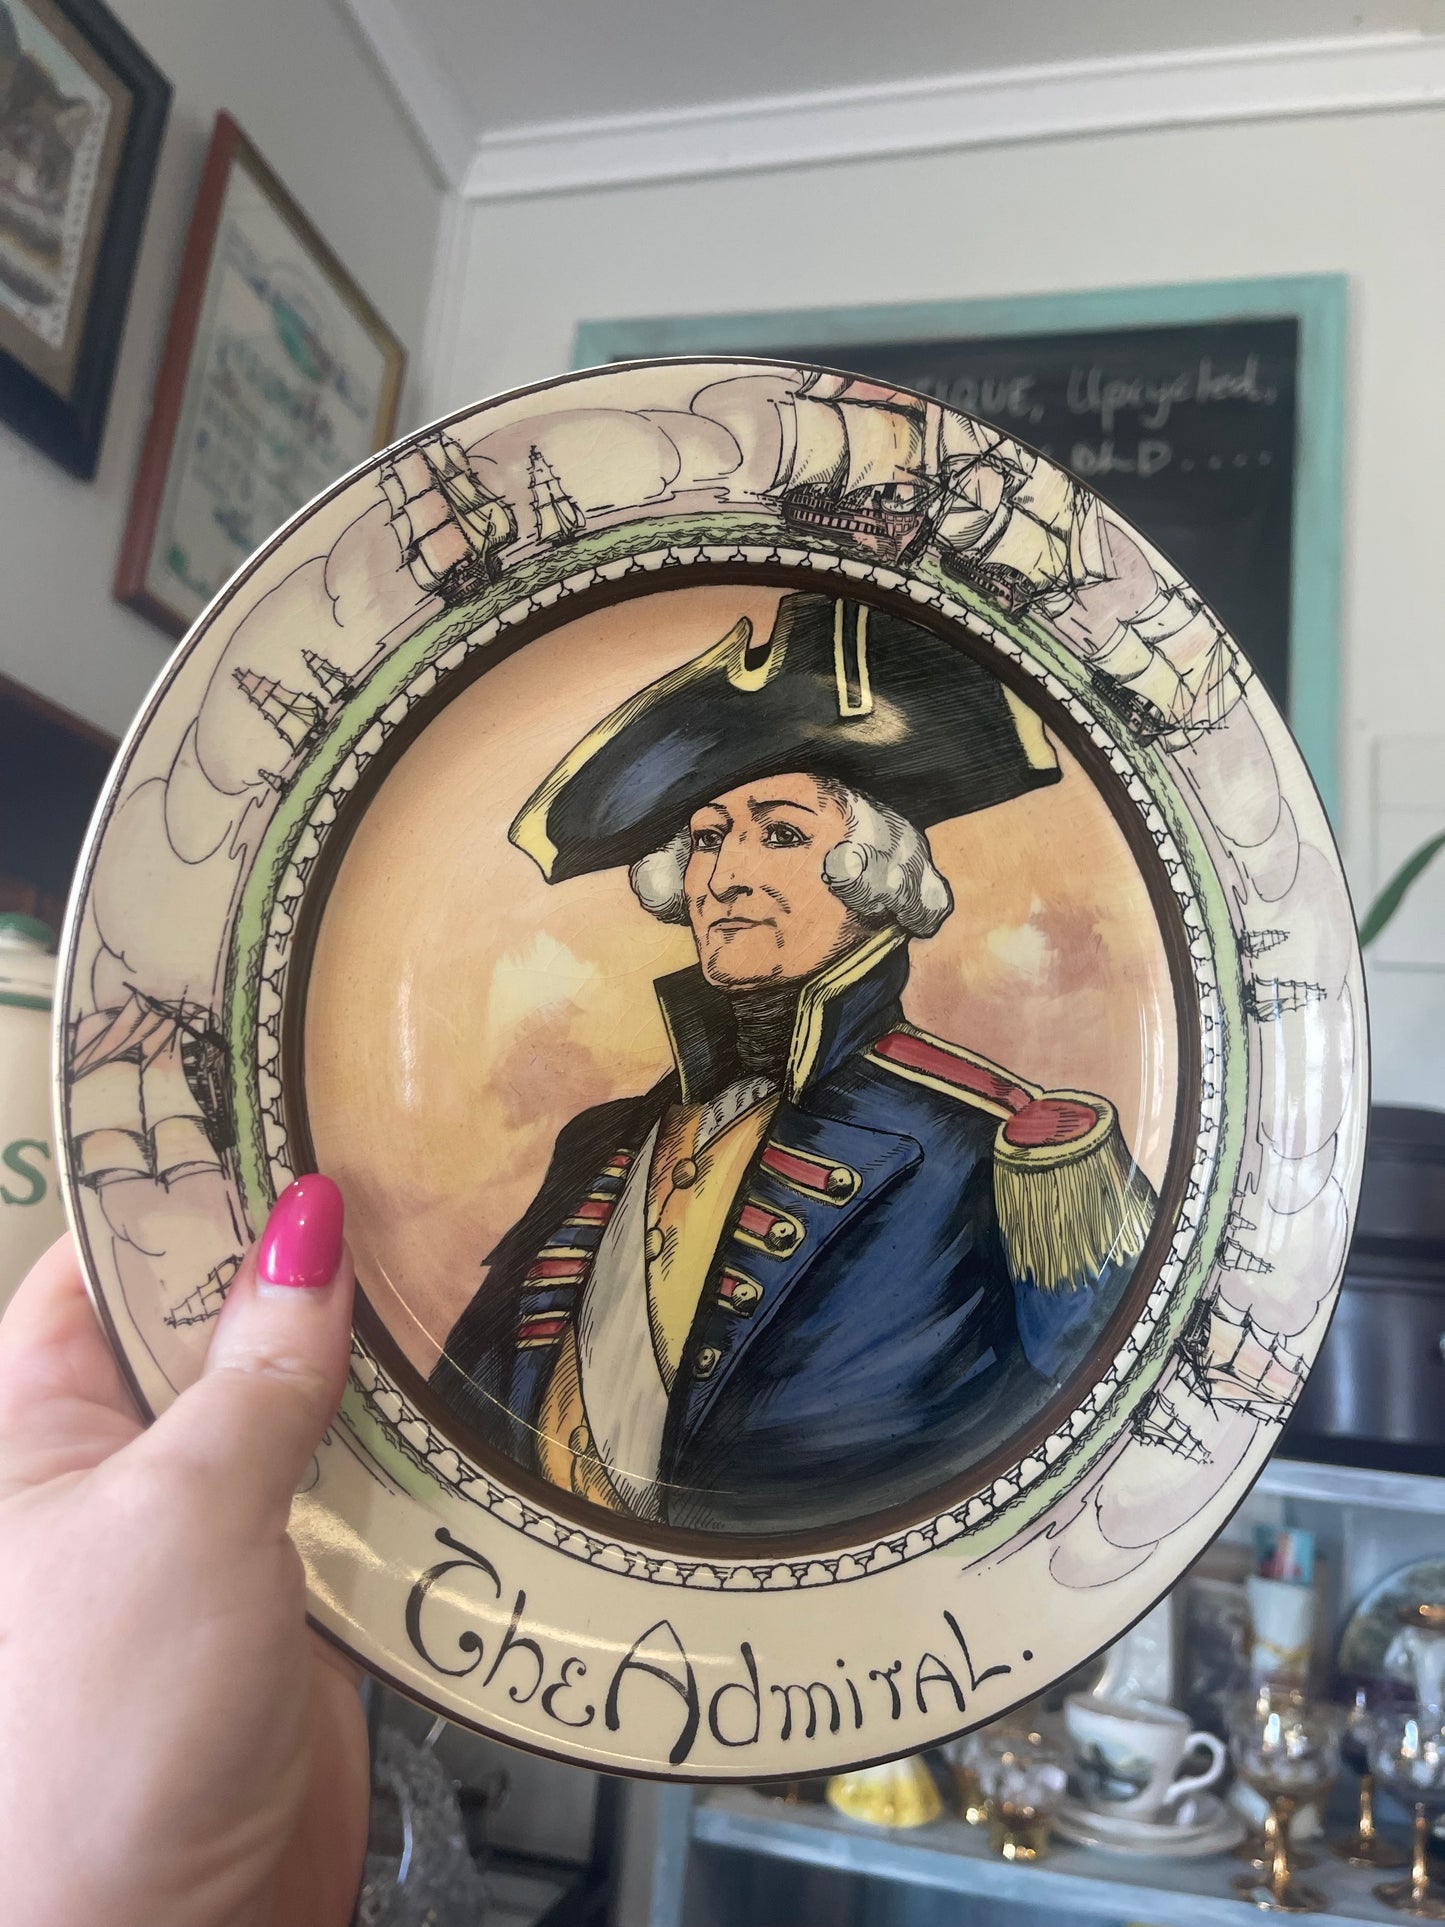 Vintage 1930s Royal Doulton Plate “The Admiral”